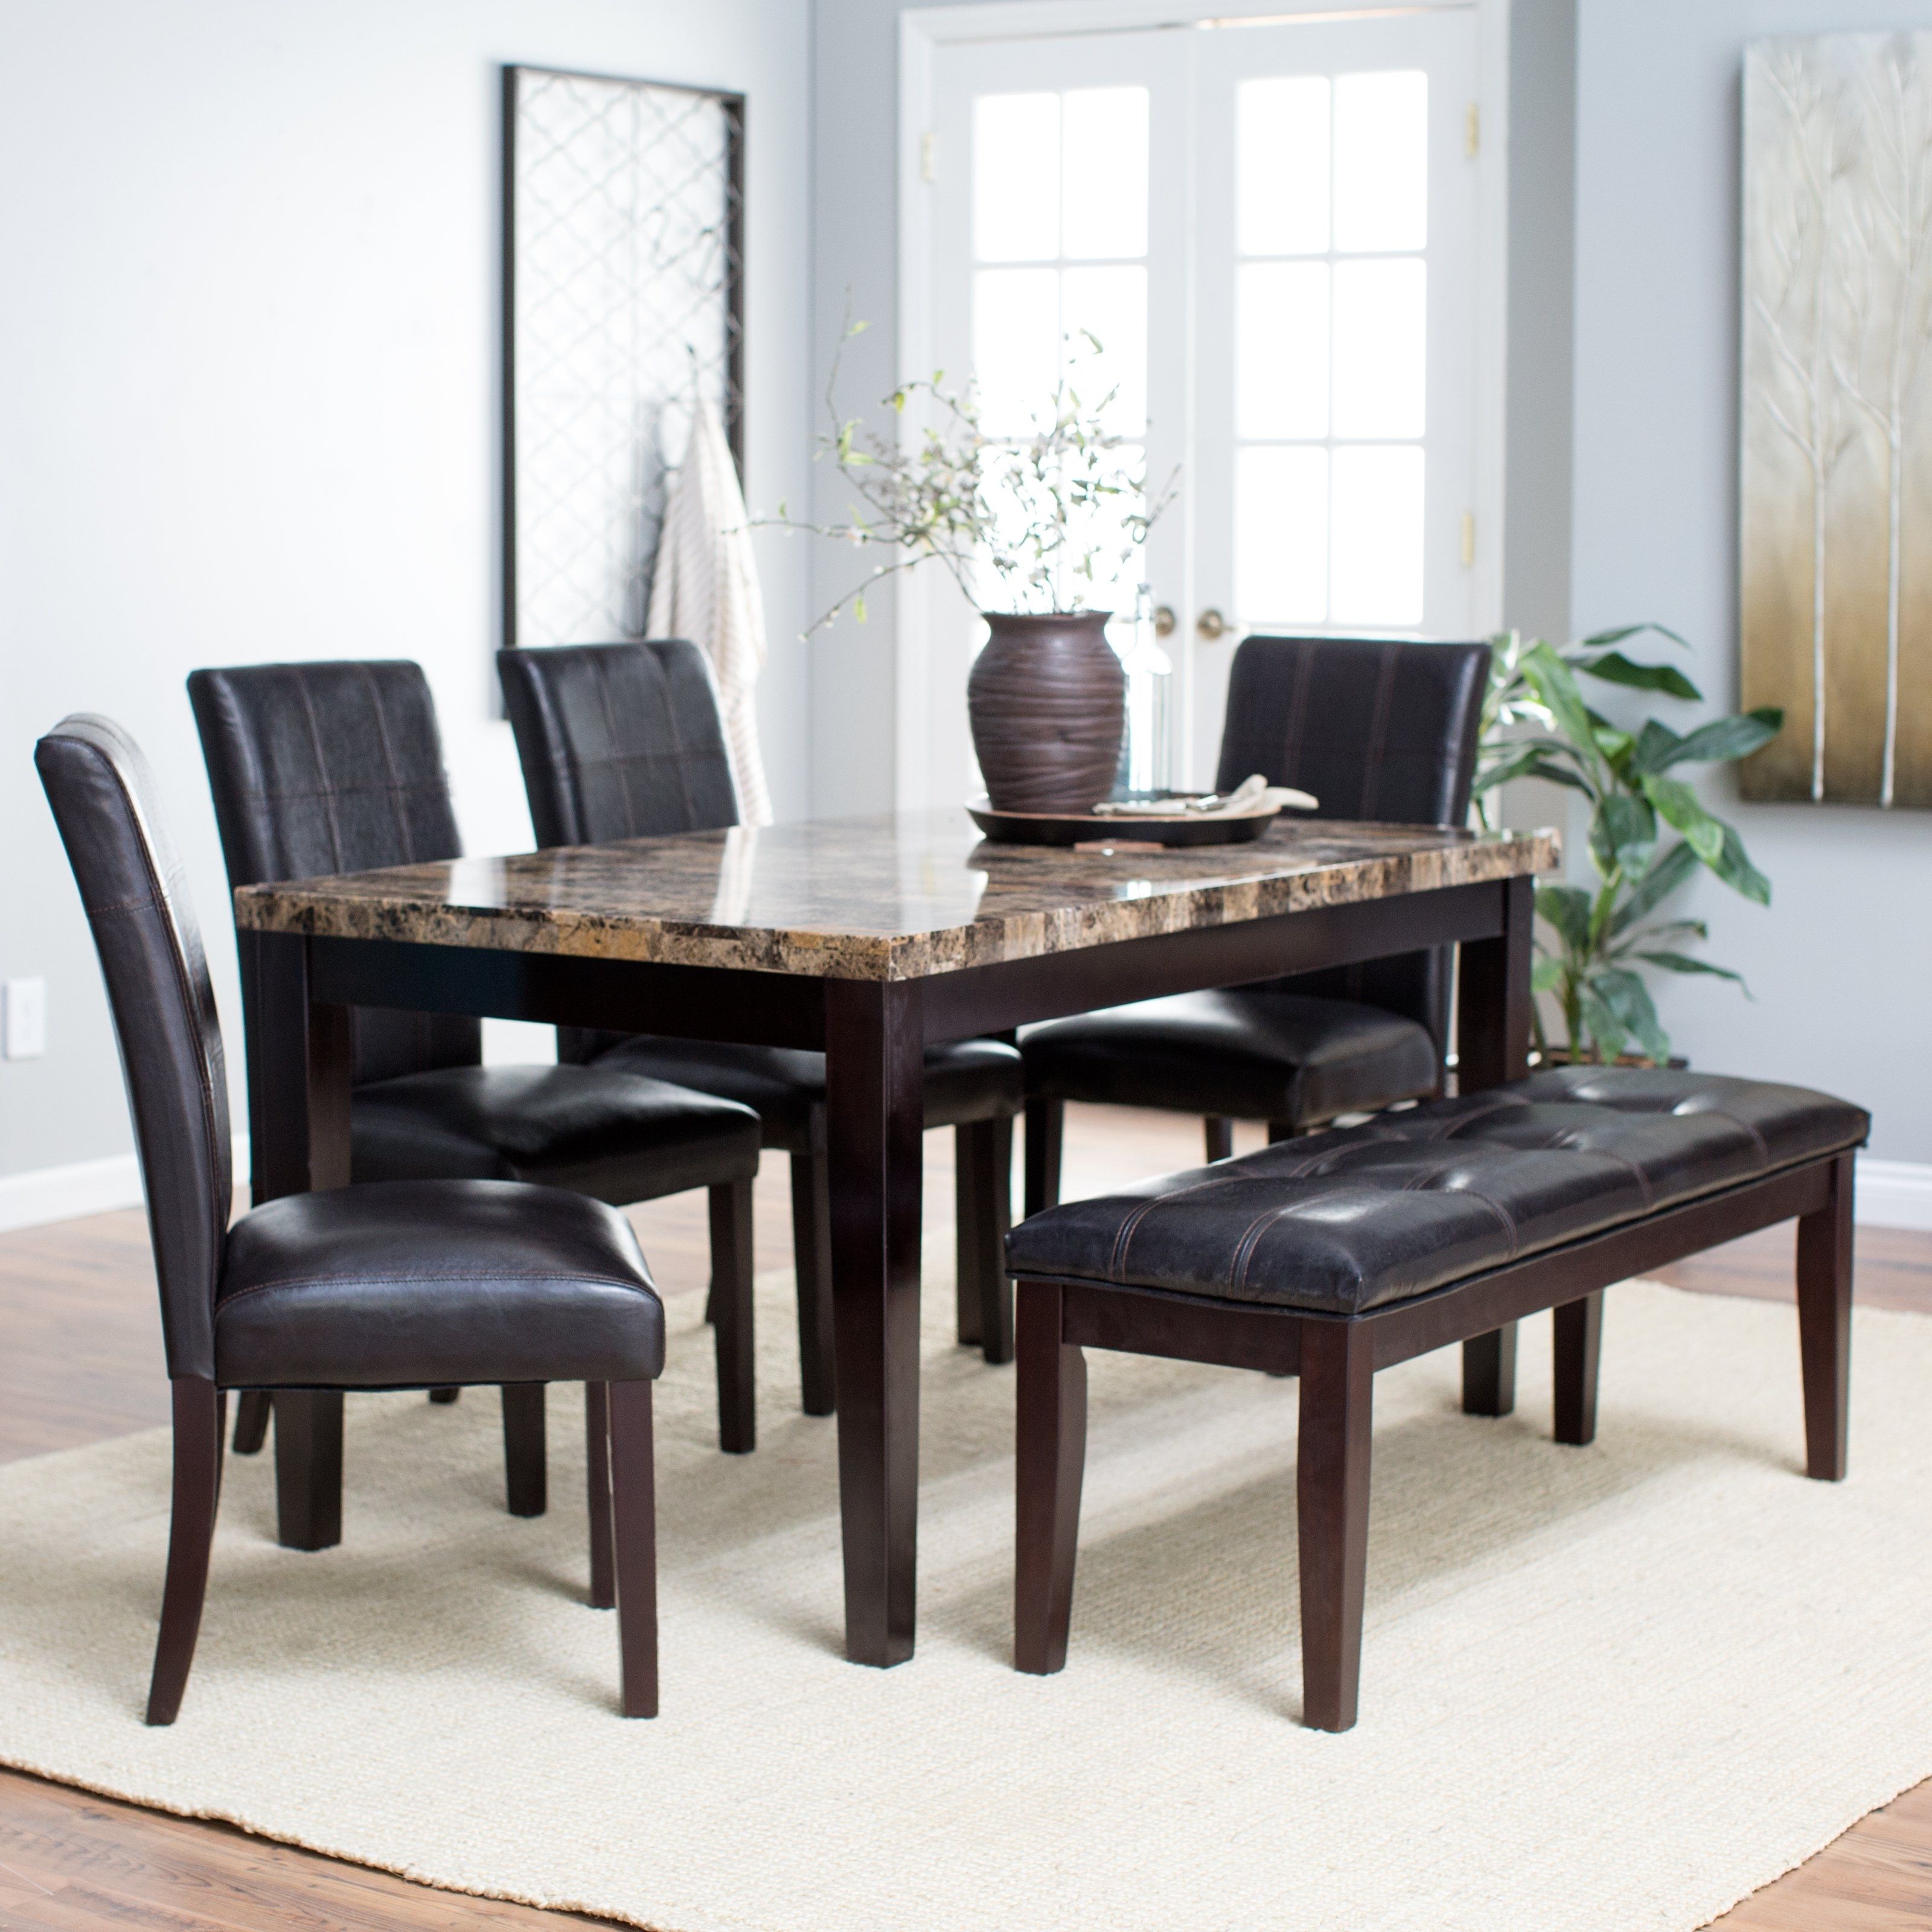 2017 Types Of Dining Table Sets – Pickndecor In Dining Tables For Six (View 2 of 25)